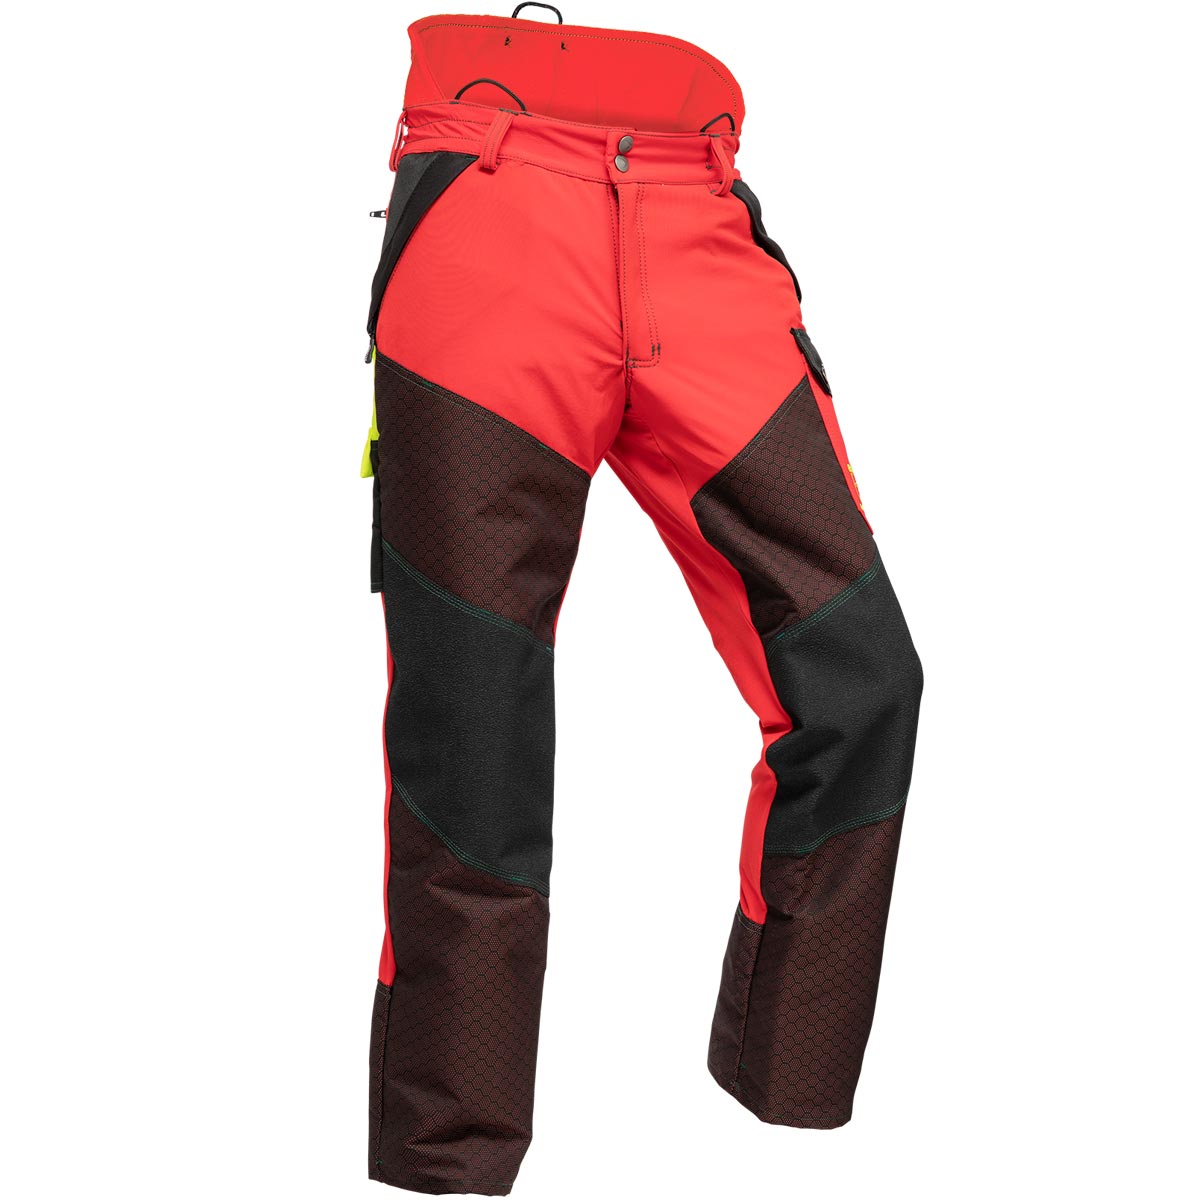 Pfanner Gladiator® extreme cut protection trousers